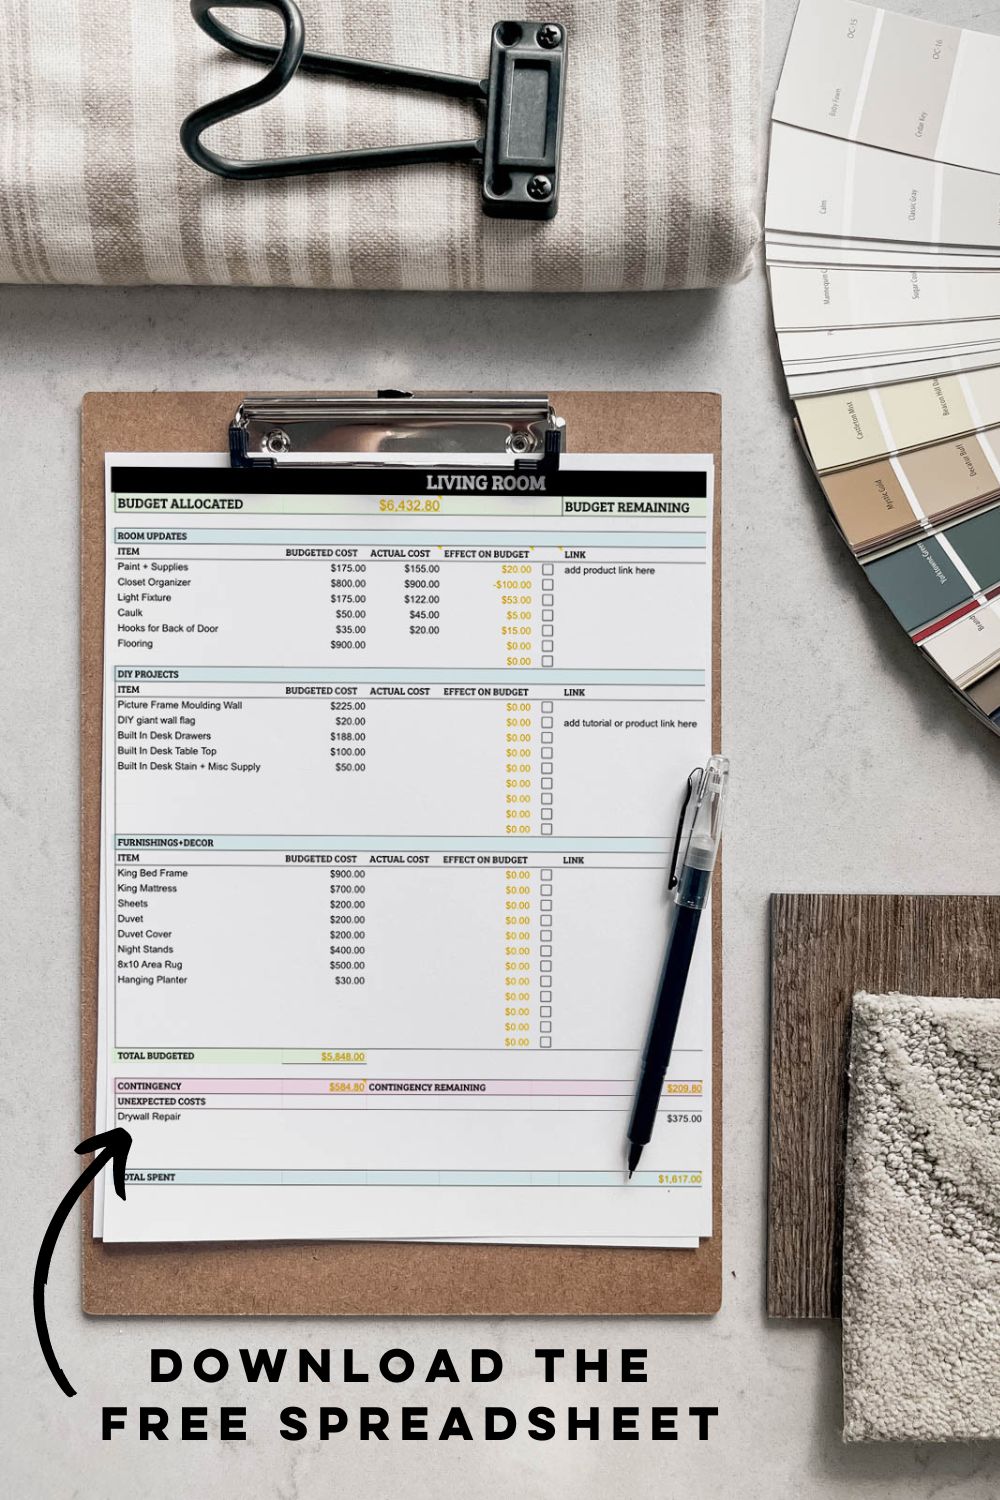 Free room makeover budgeting spreadsheet on clipboard surrounded by room decor samples